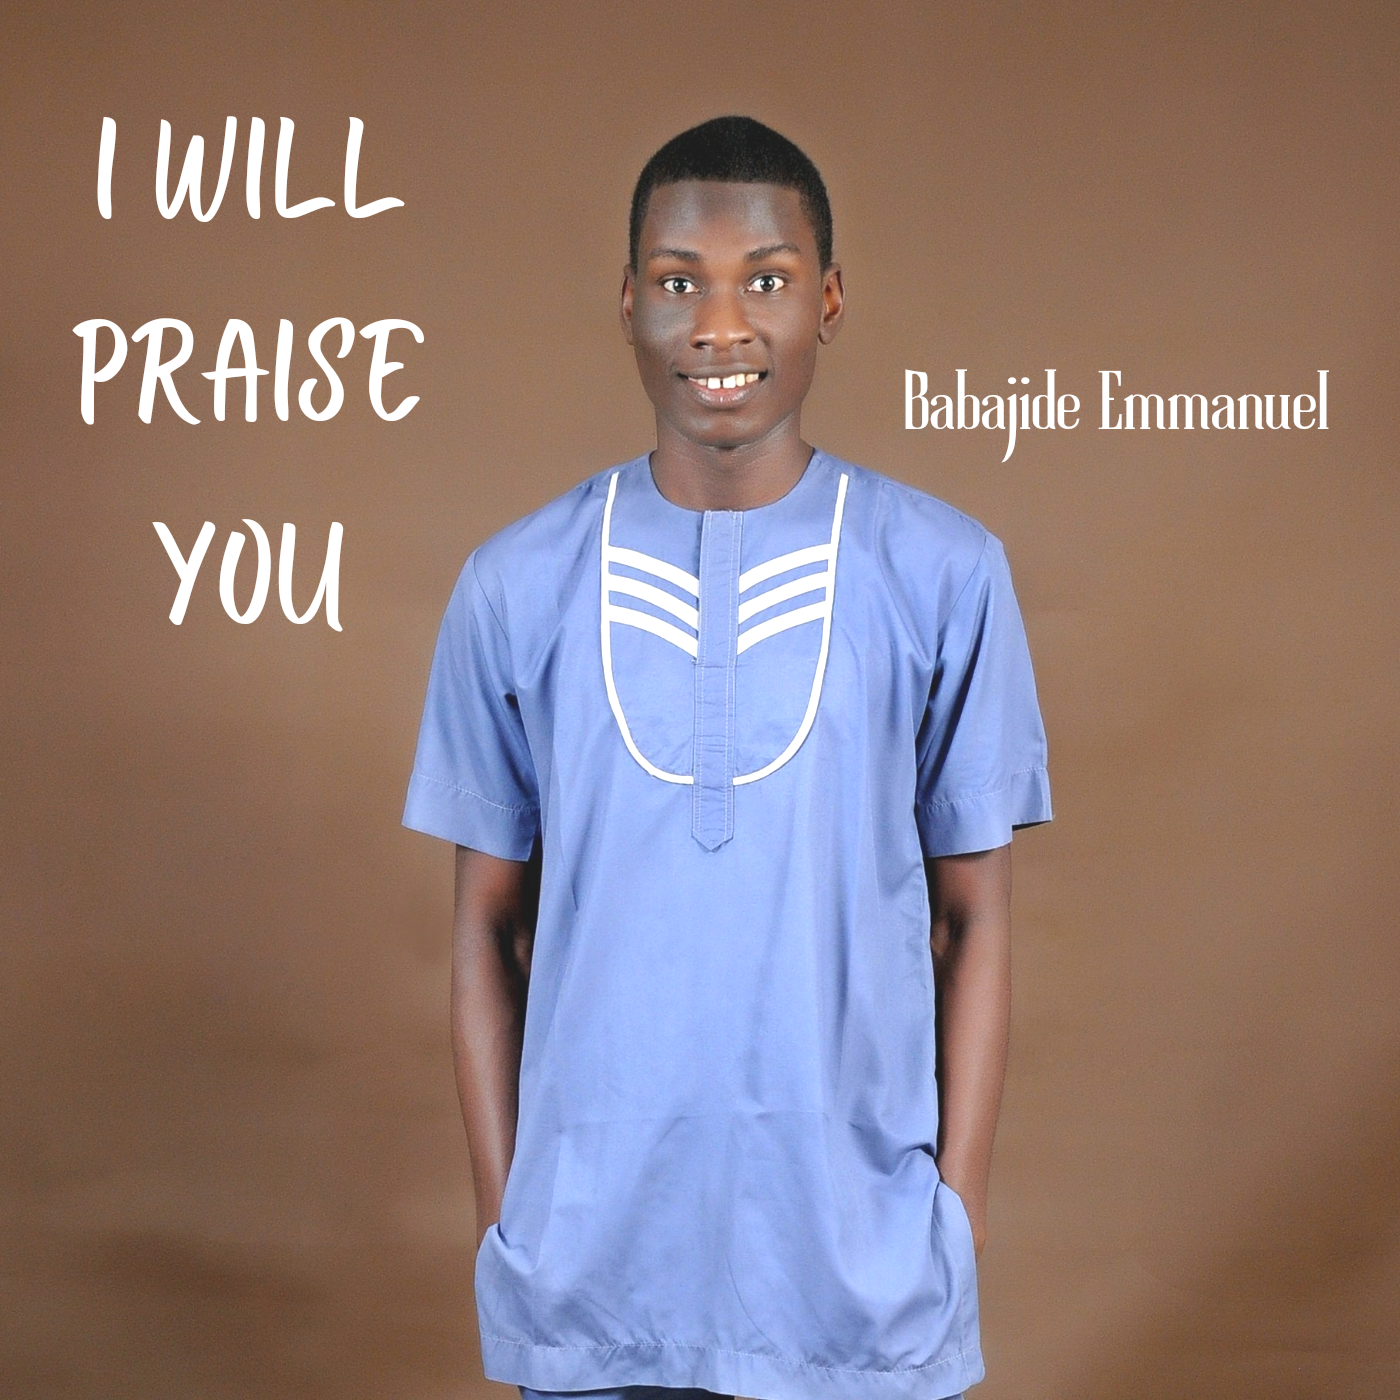 I Will Praise You Image